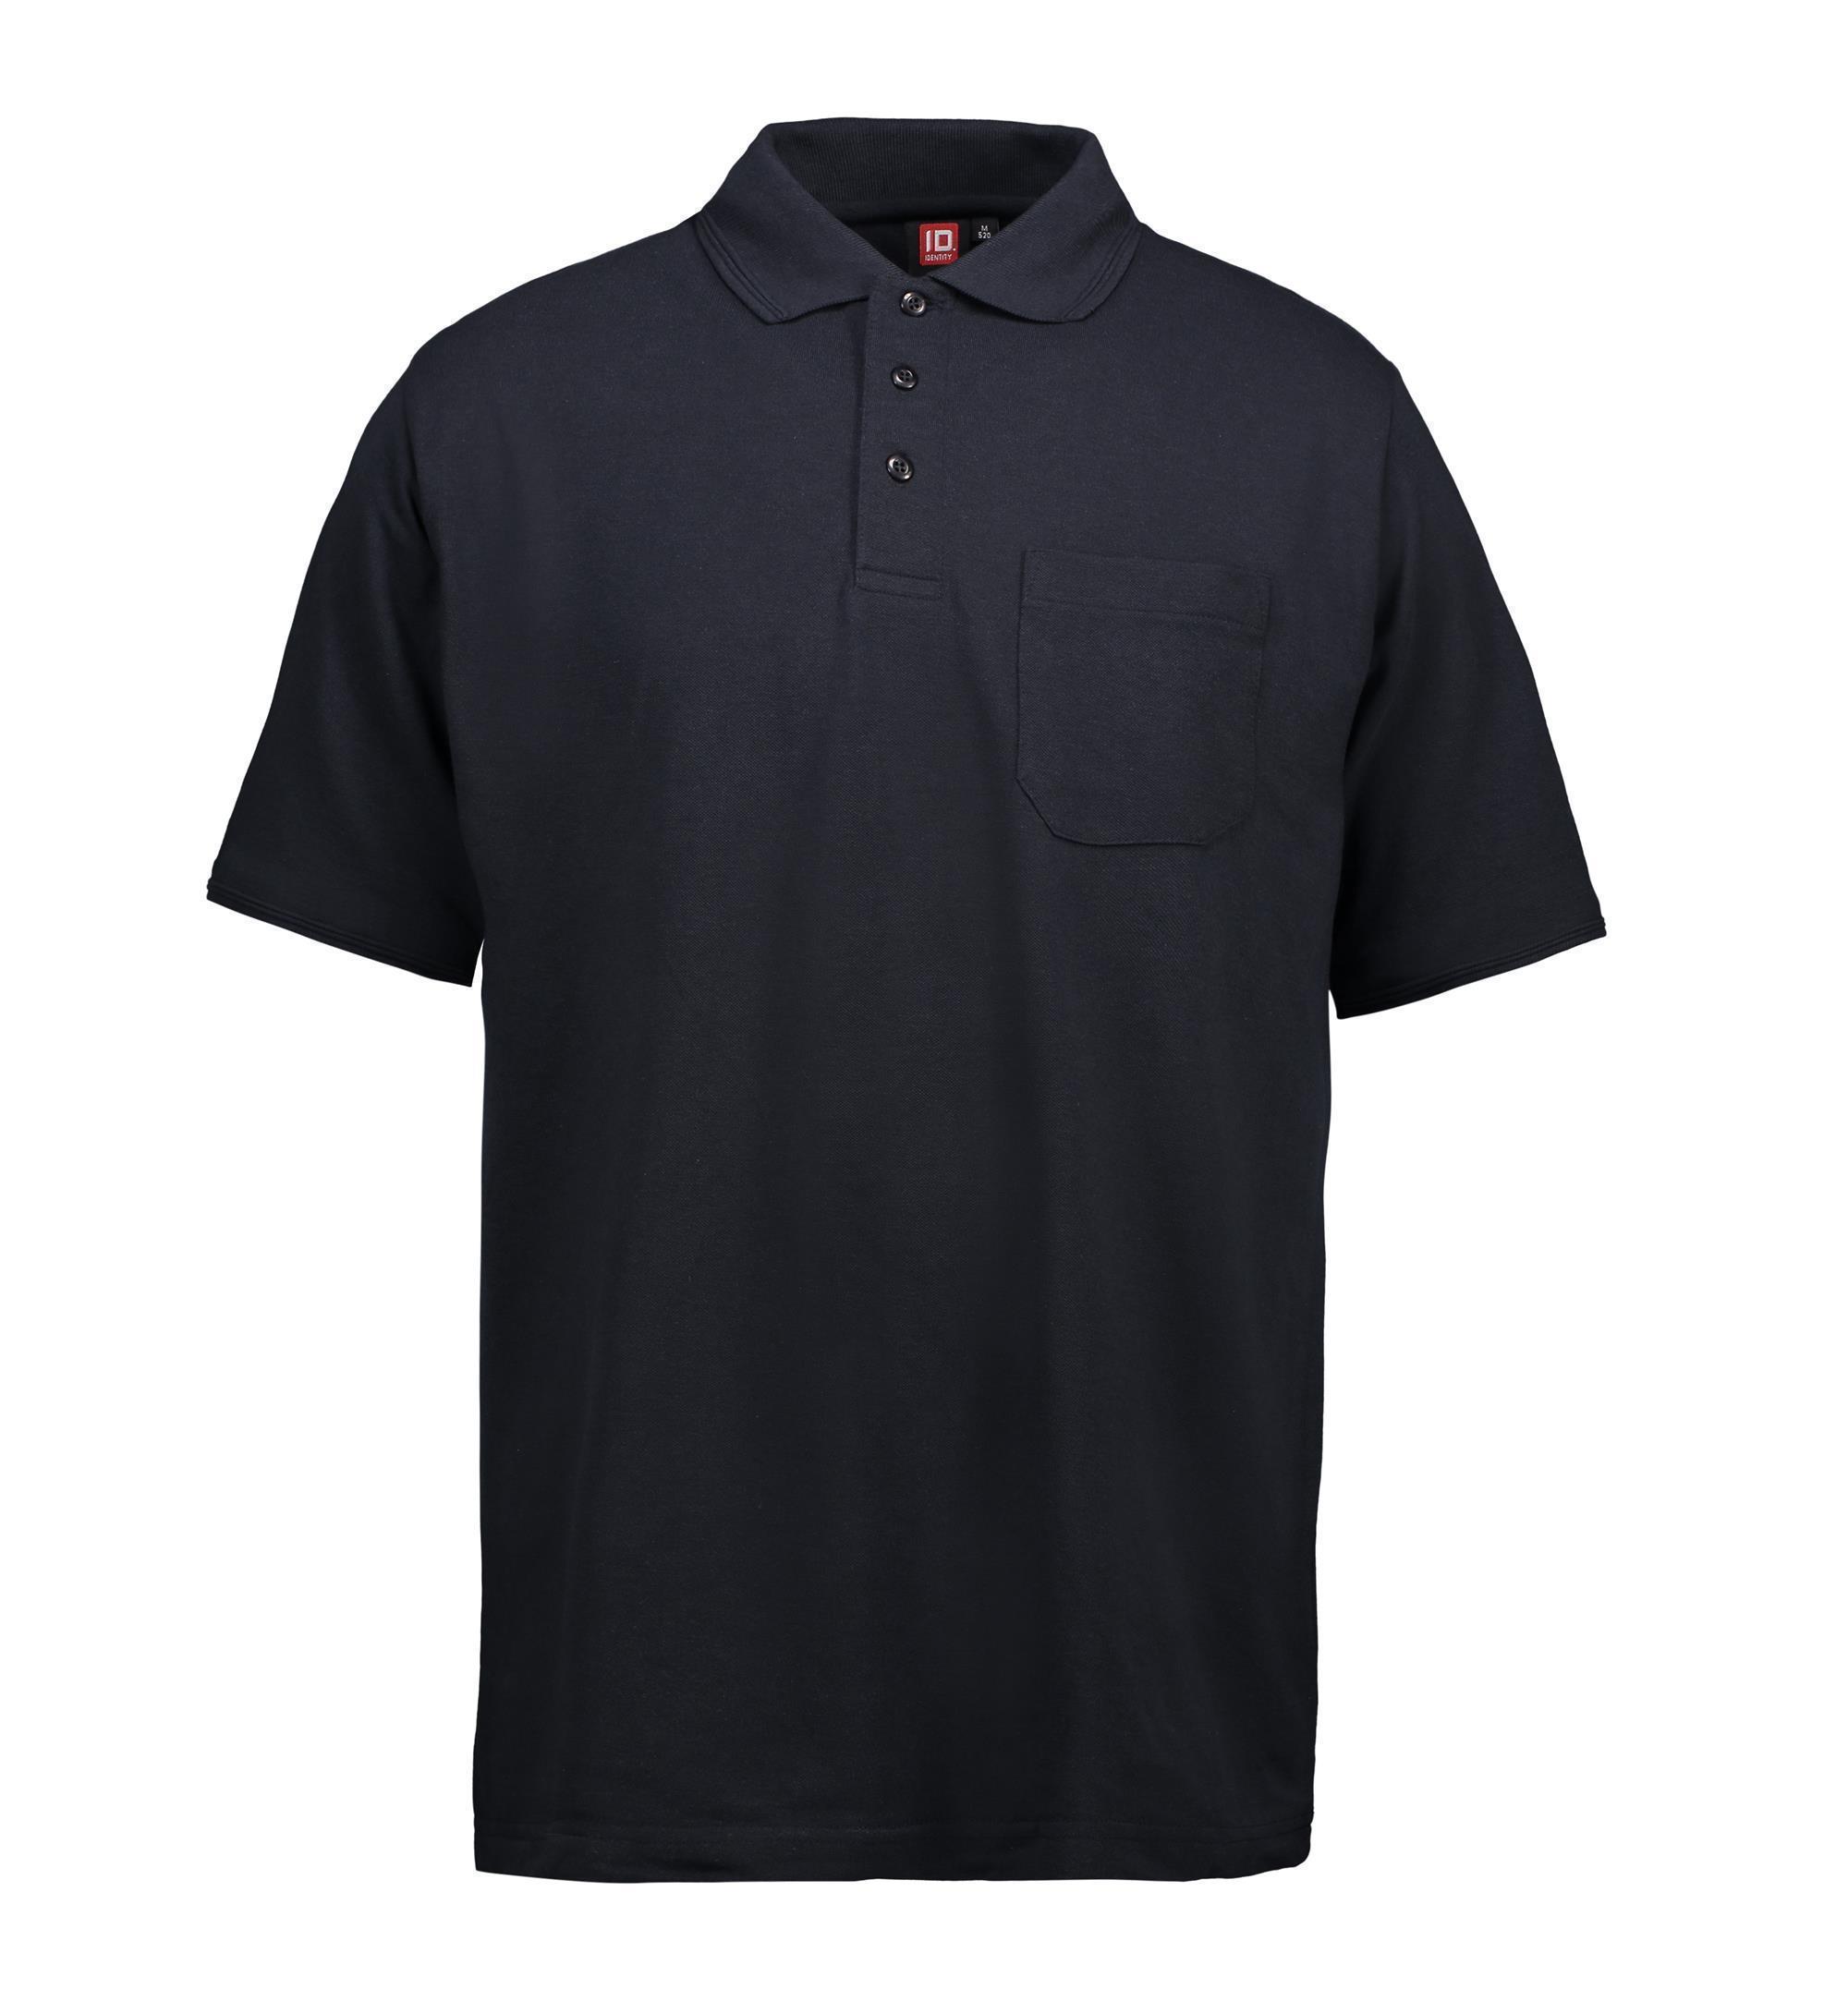 Classic men's polo shirt with pocket 180 g/m² ID Identity®